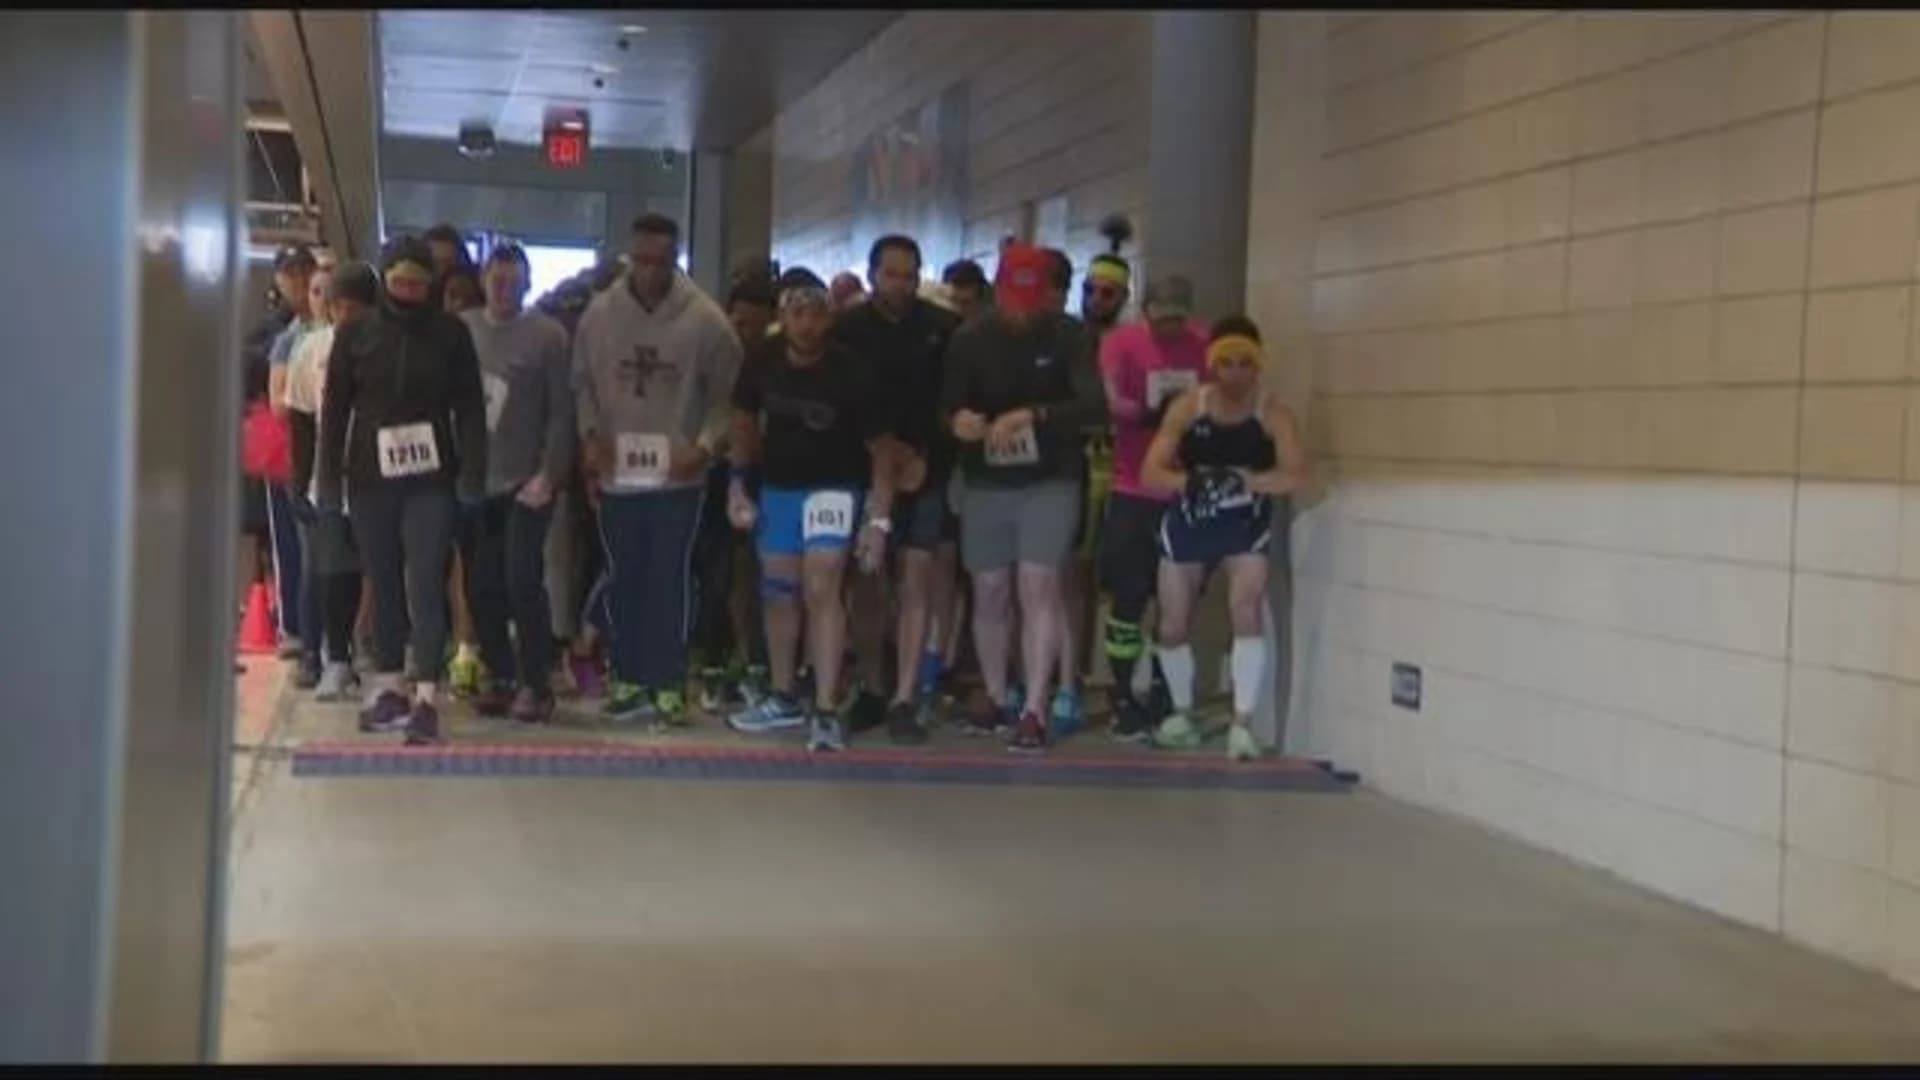 5K for cancer research held at Yankee Stadium